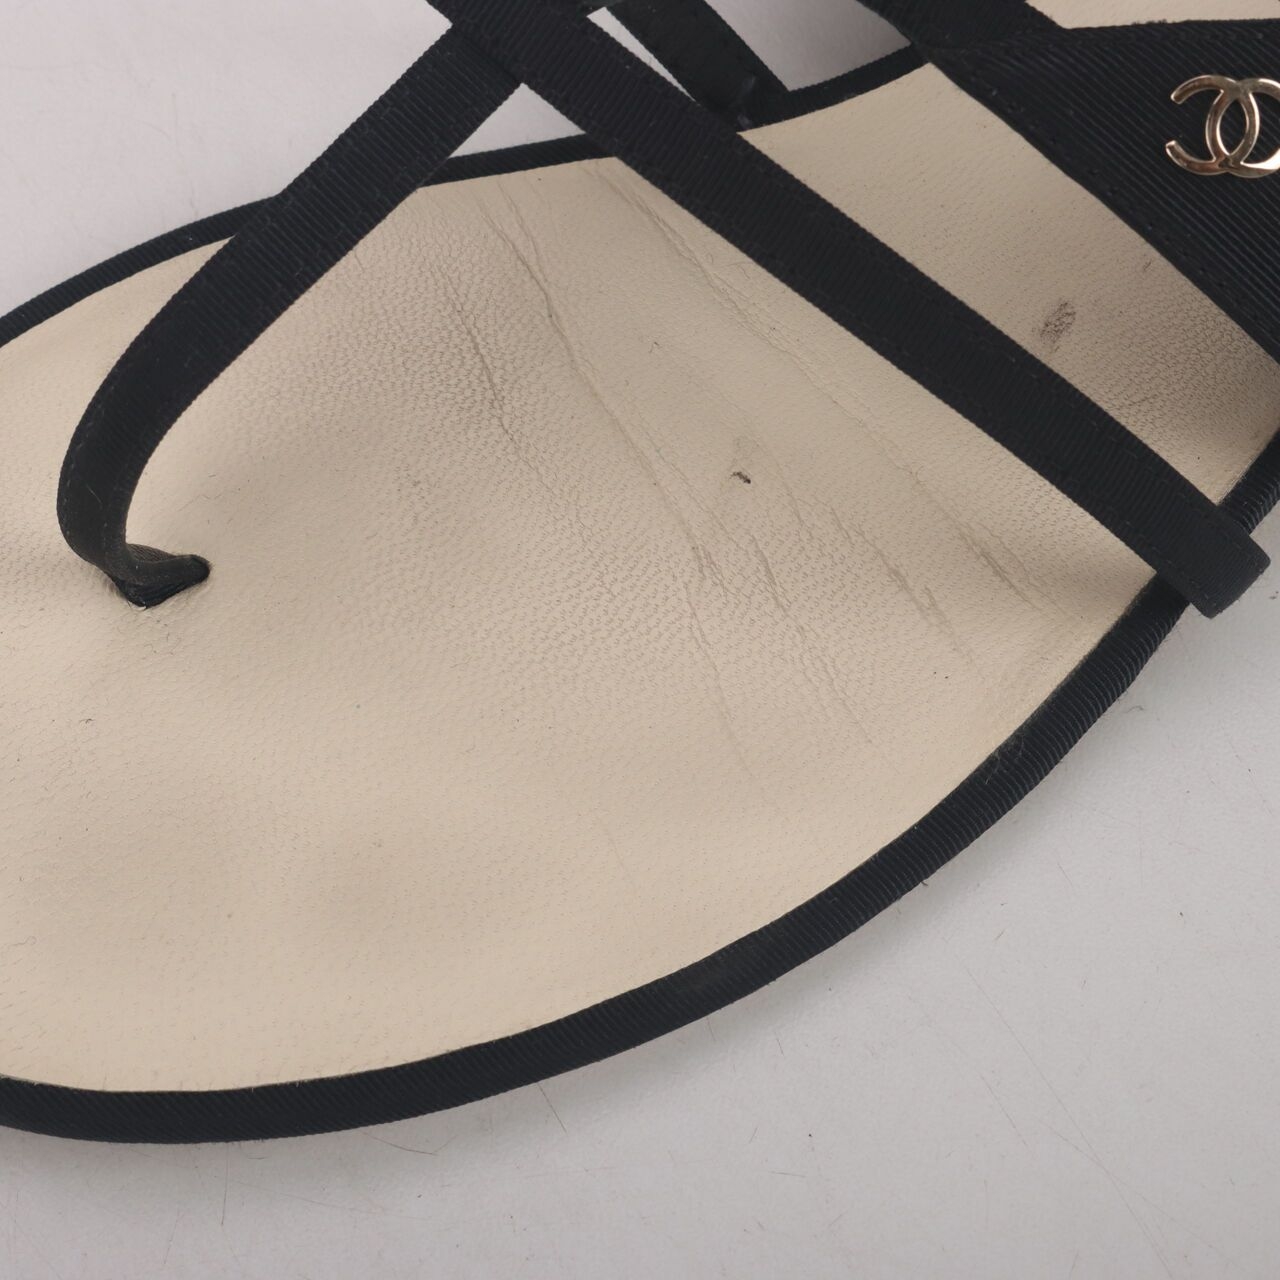 Chanel Grosgrain Black With Pearl Sandals